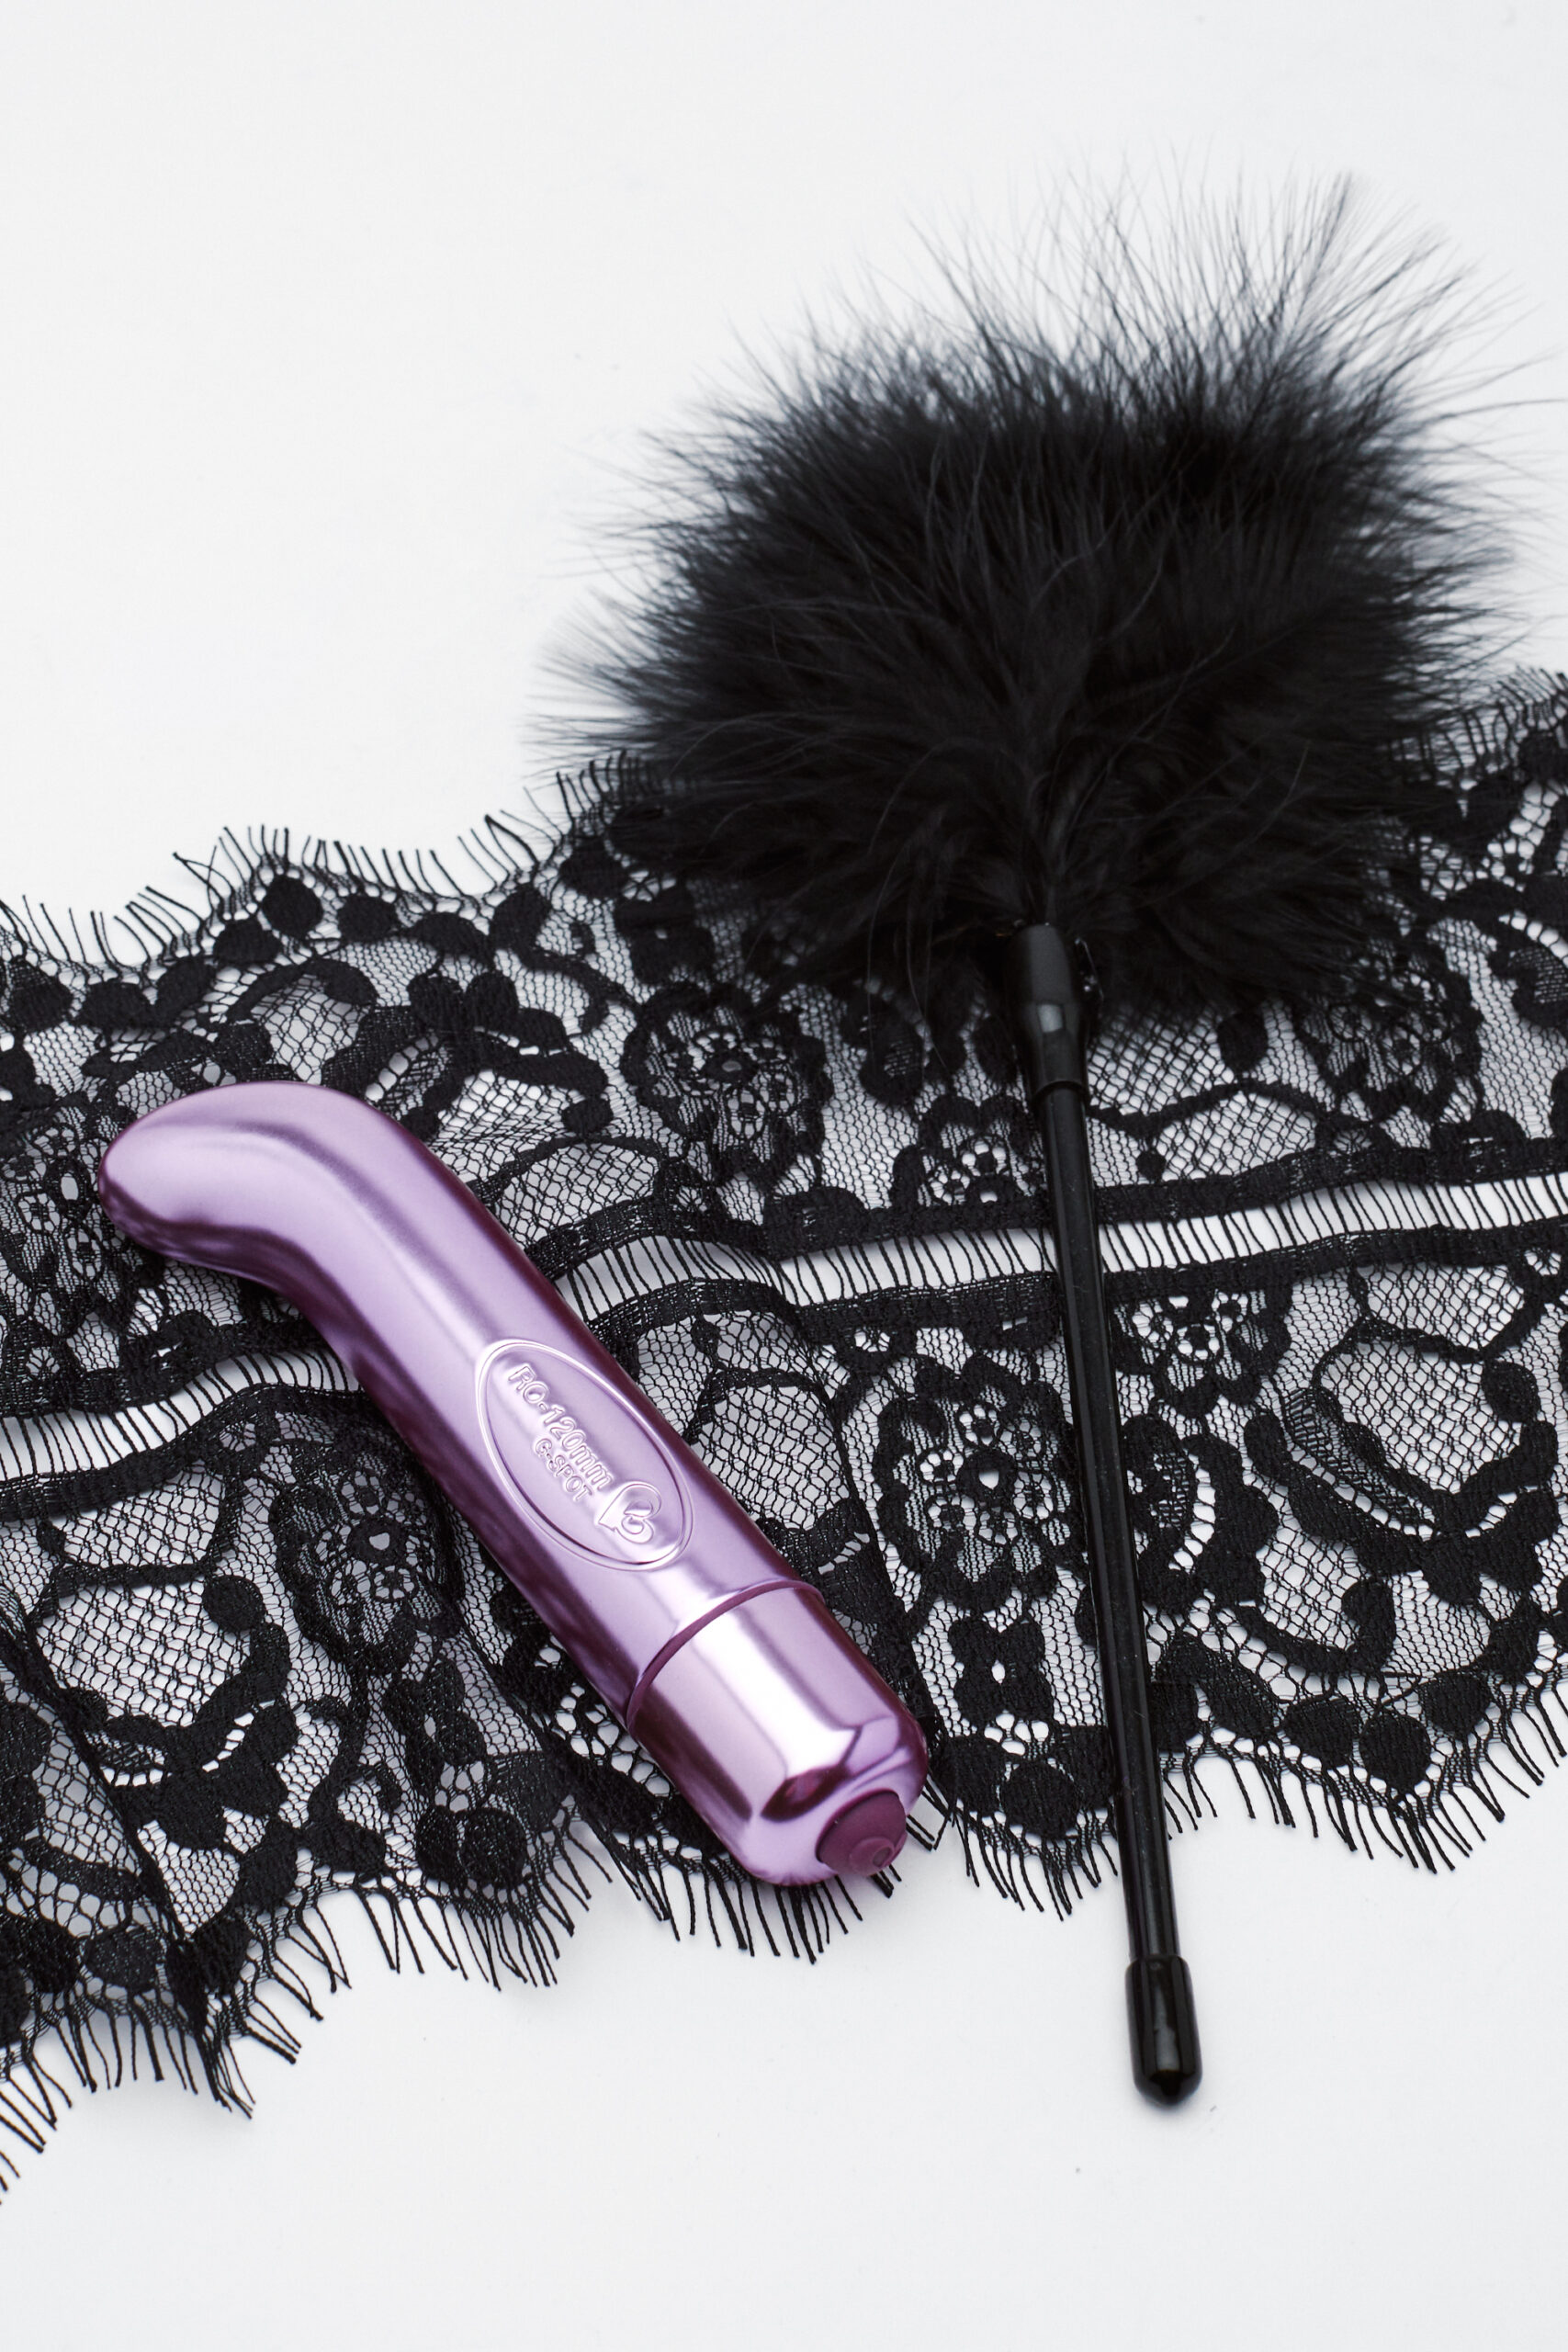 Feather Tickler Vibrator And Blindfold 3 Piece Pleasure Kit